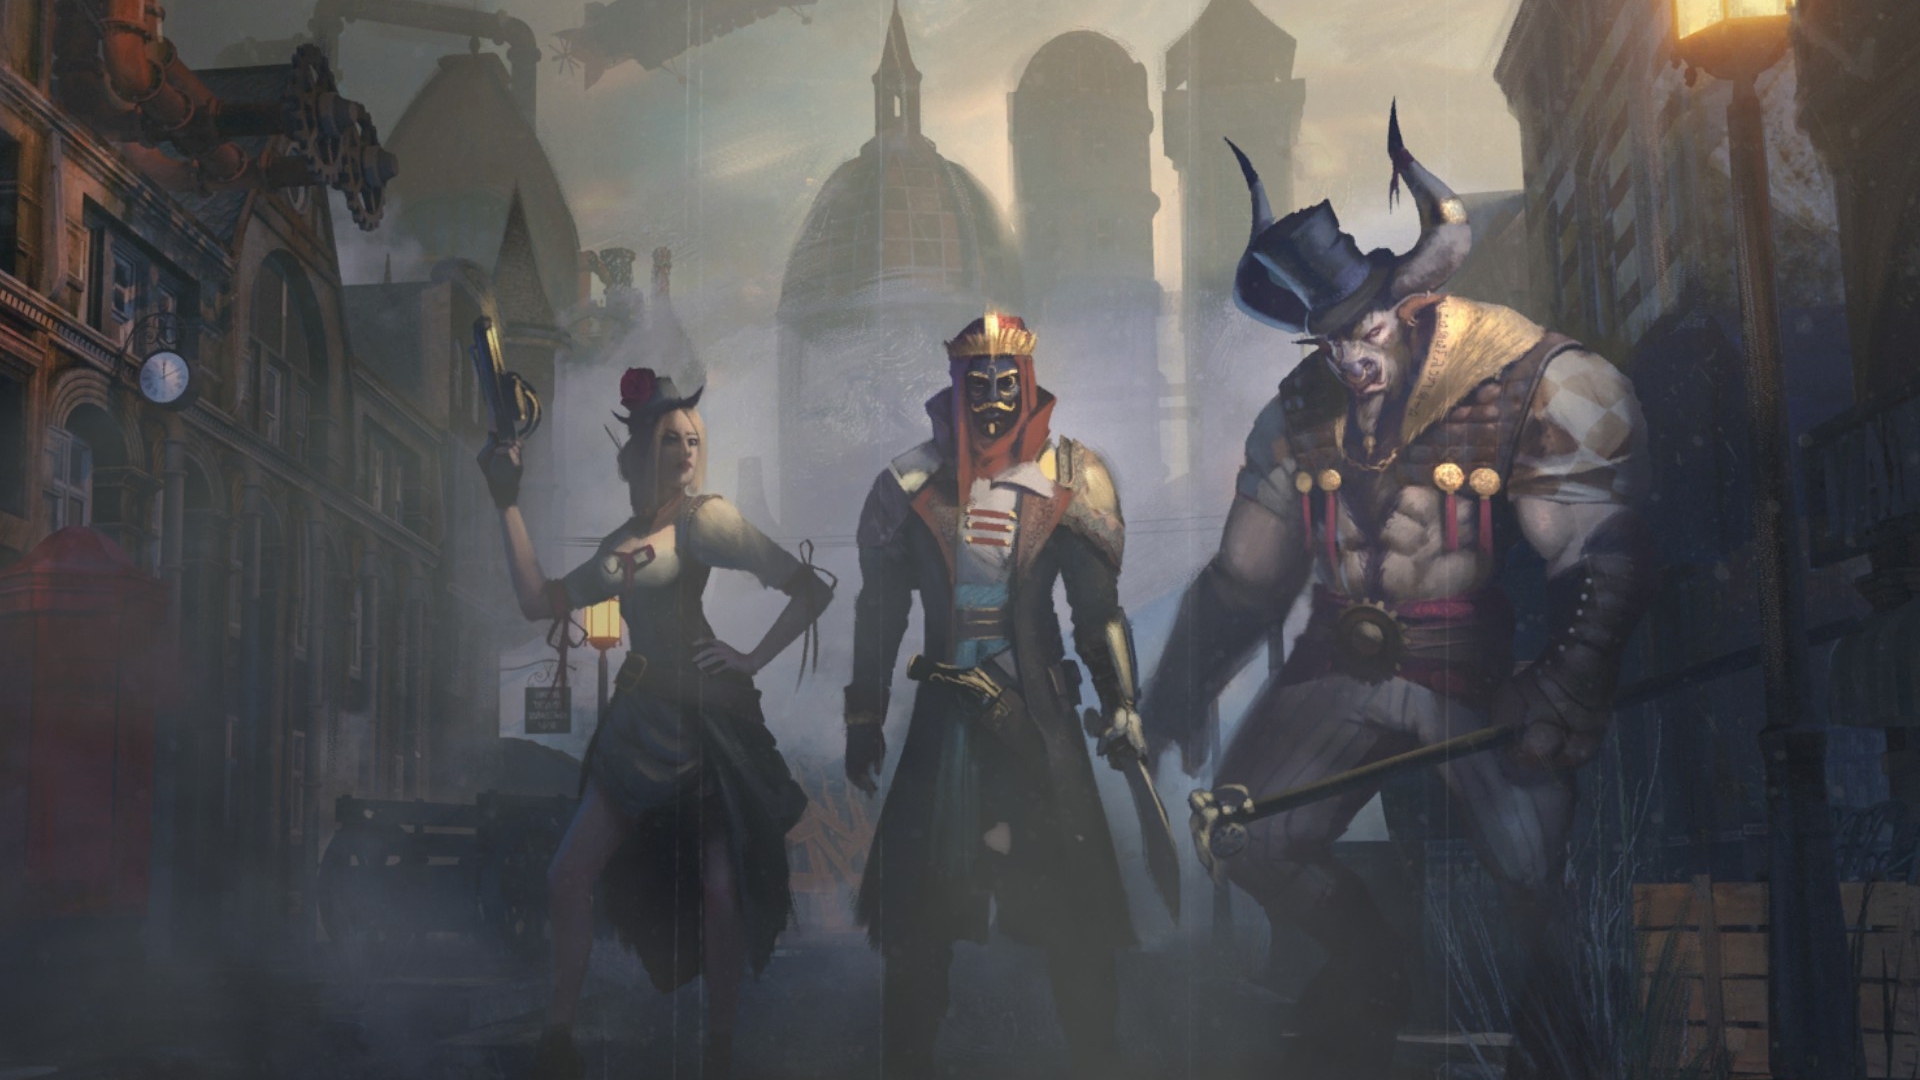  Sovereign Syndicate is shaping up to be steampunk Disco Elysium 